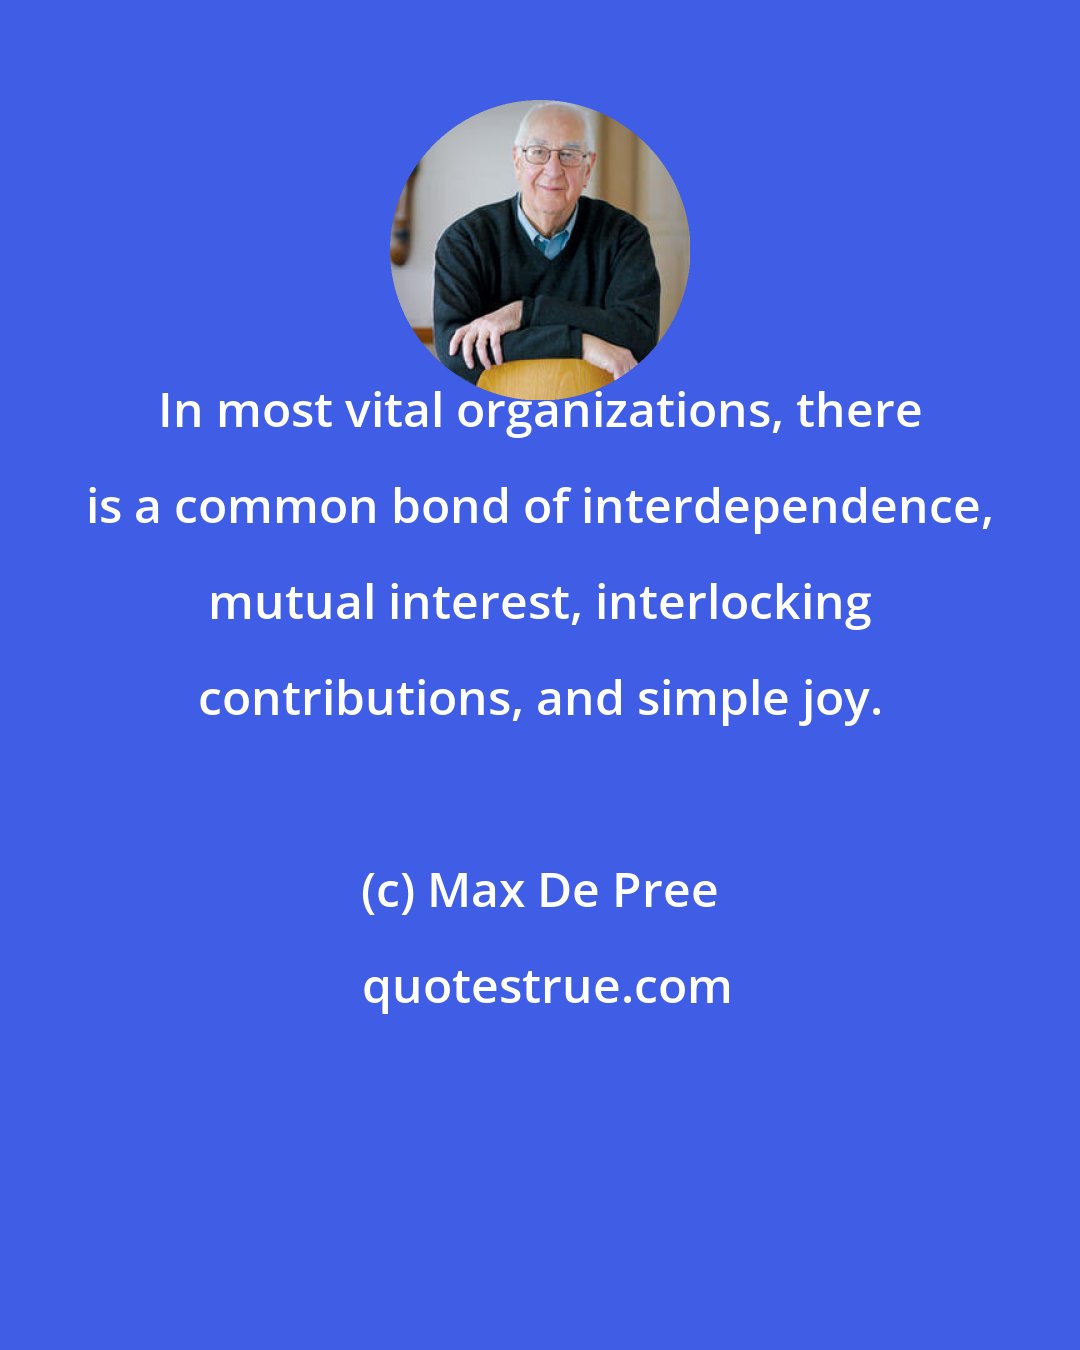 Max De Pree: In most vital organizations, there is a common bond of interdependence, mutual interest, interlocking contributions, and simple joy.